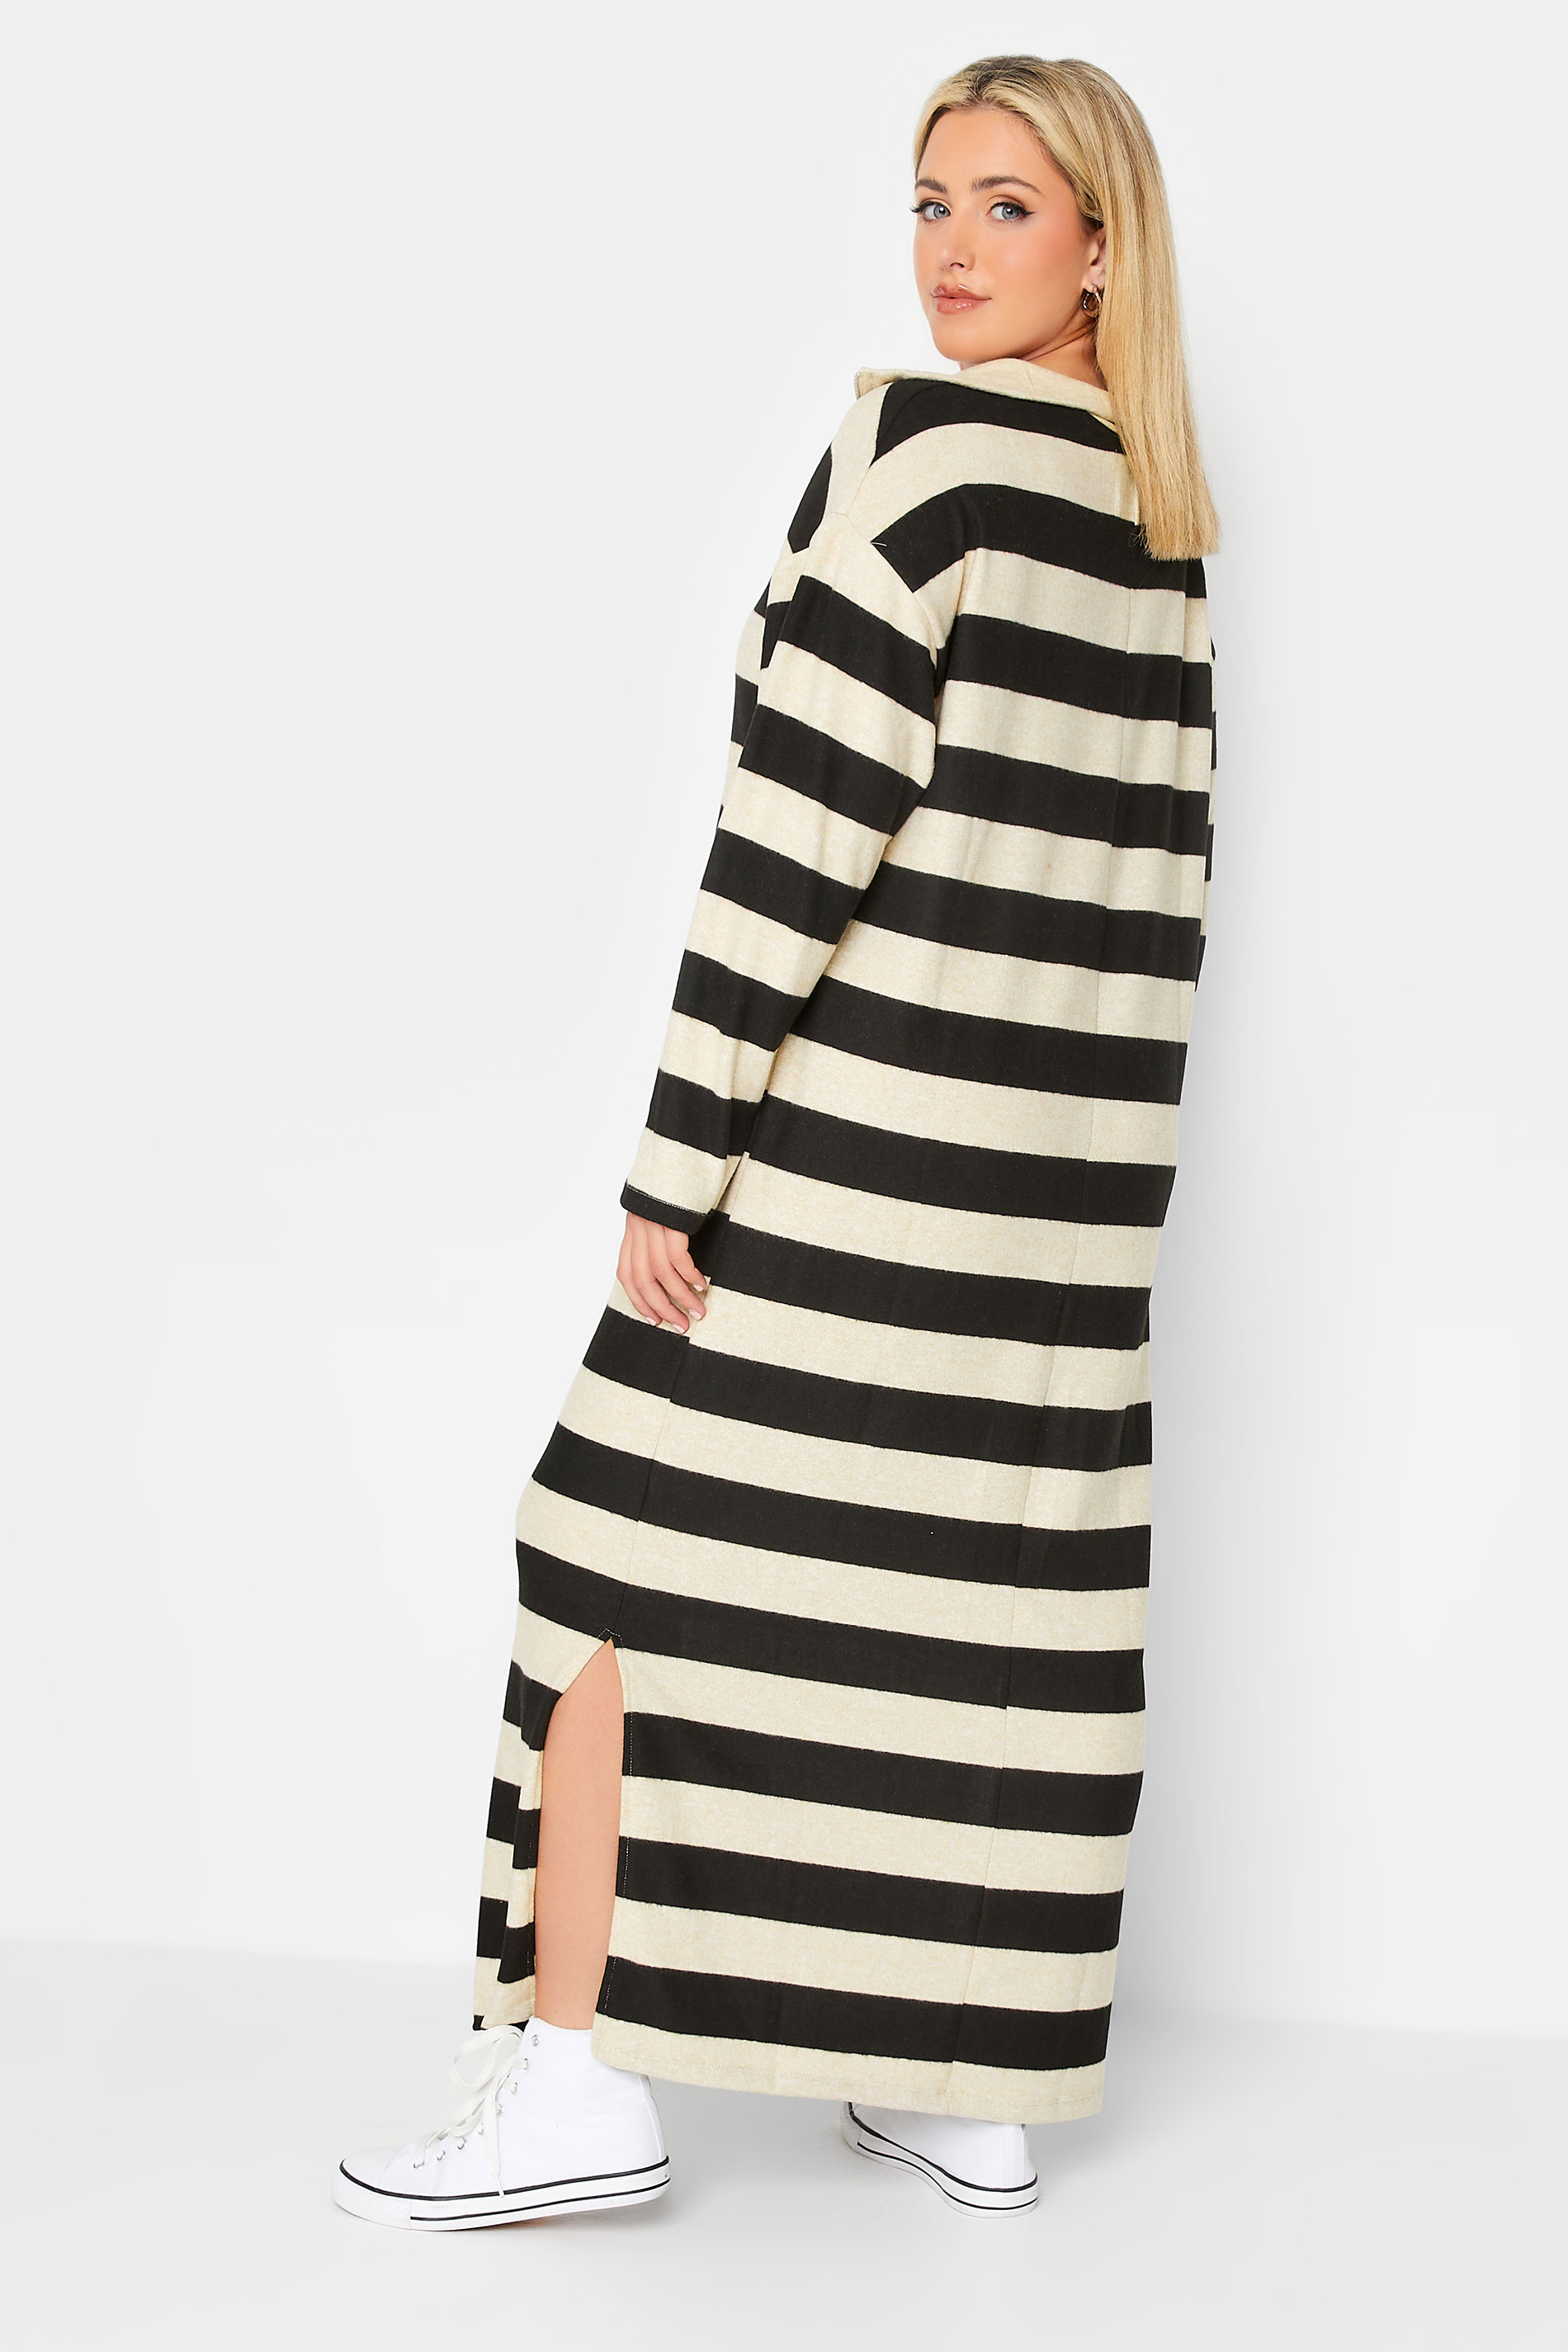 YOURS LUXURY Plus Size Cream & Black Stripe Soft Touch Jumper Dress | Yours Clothing 3